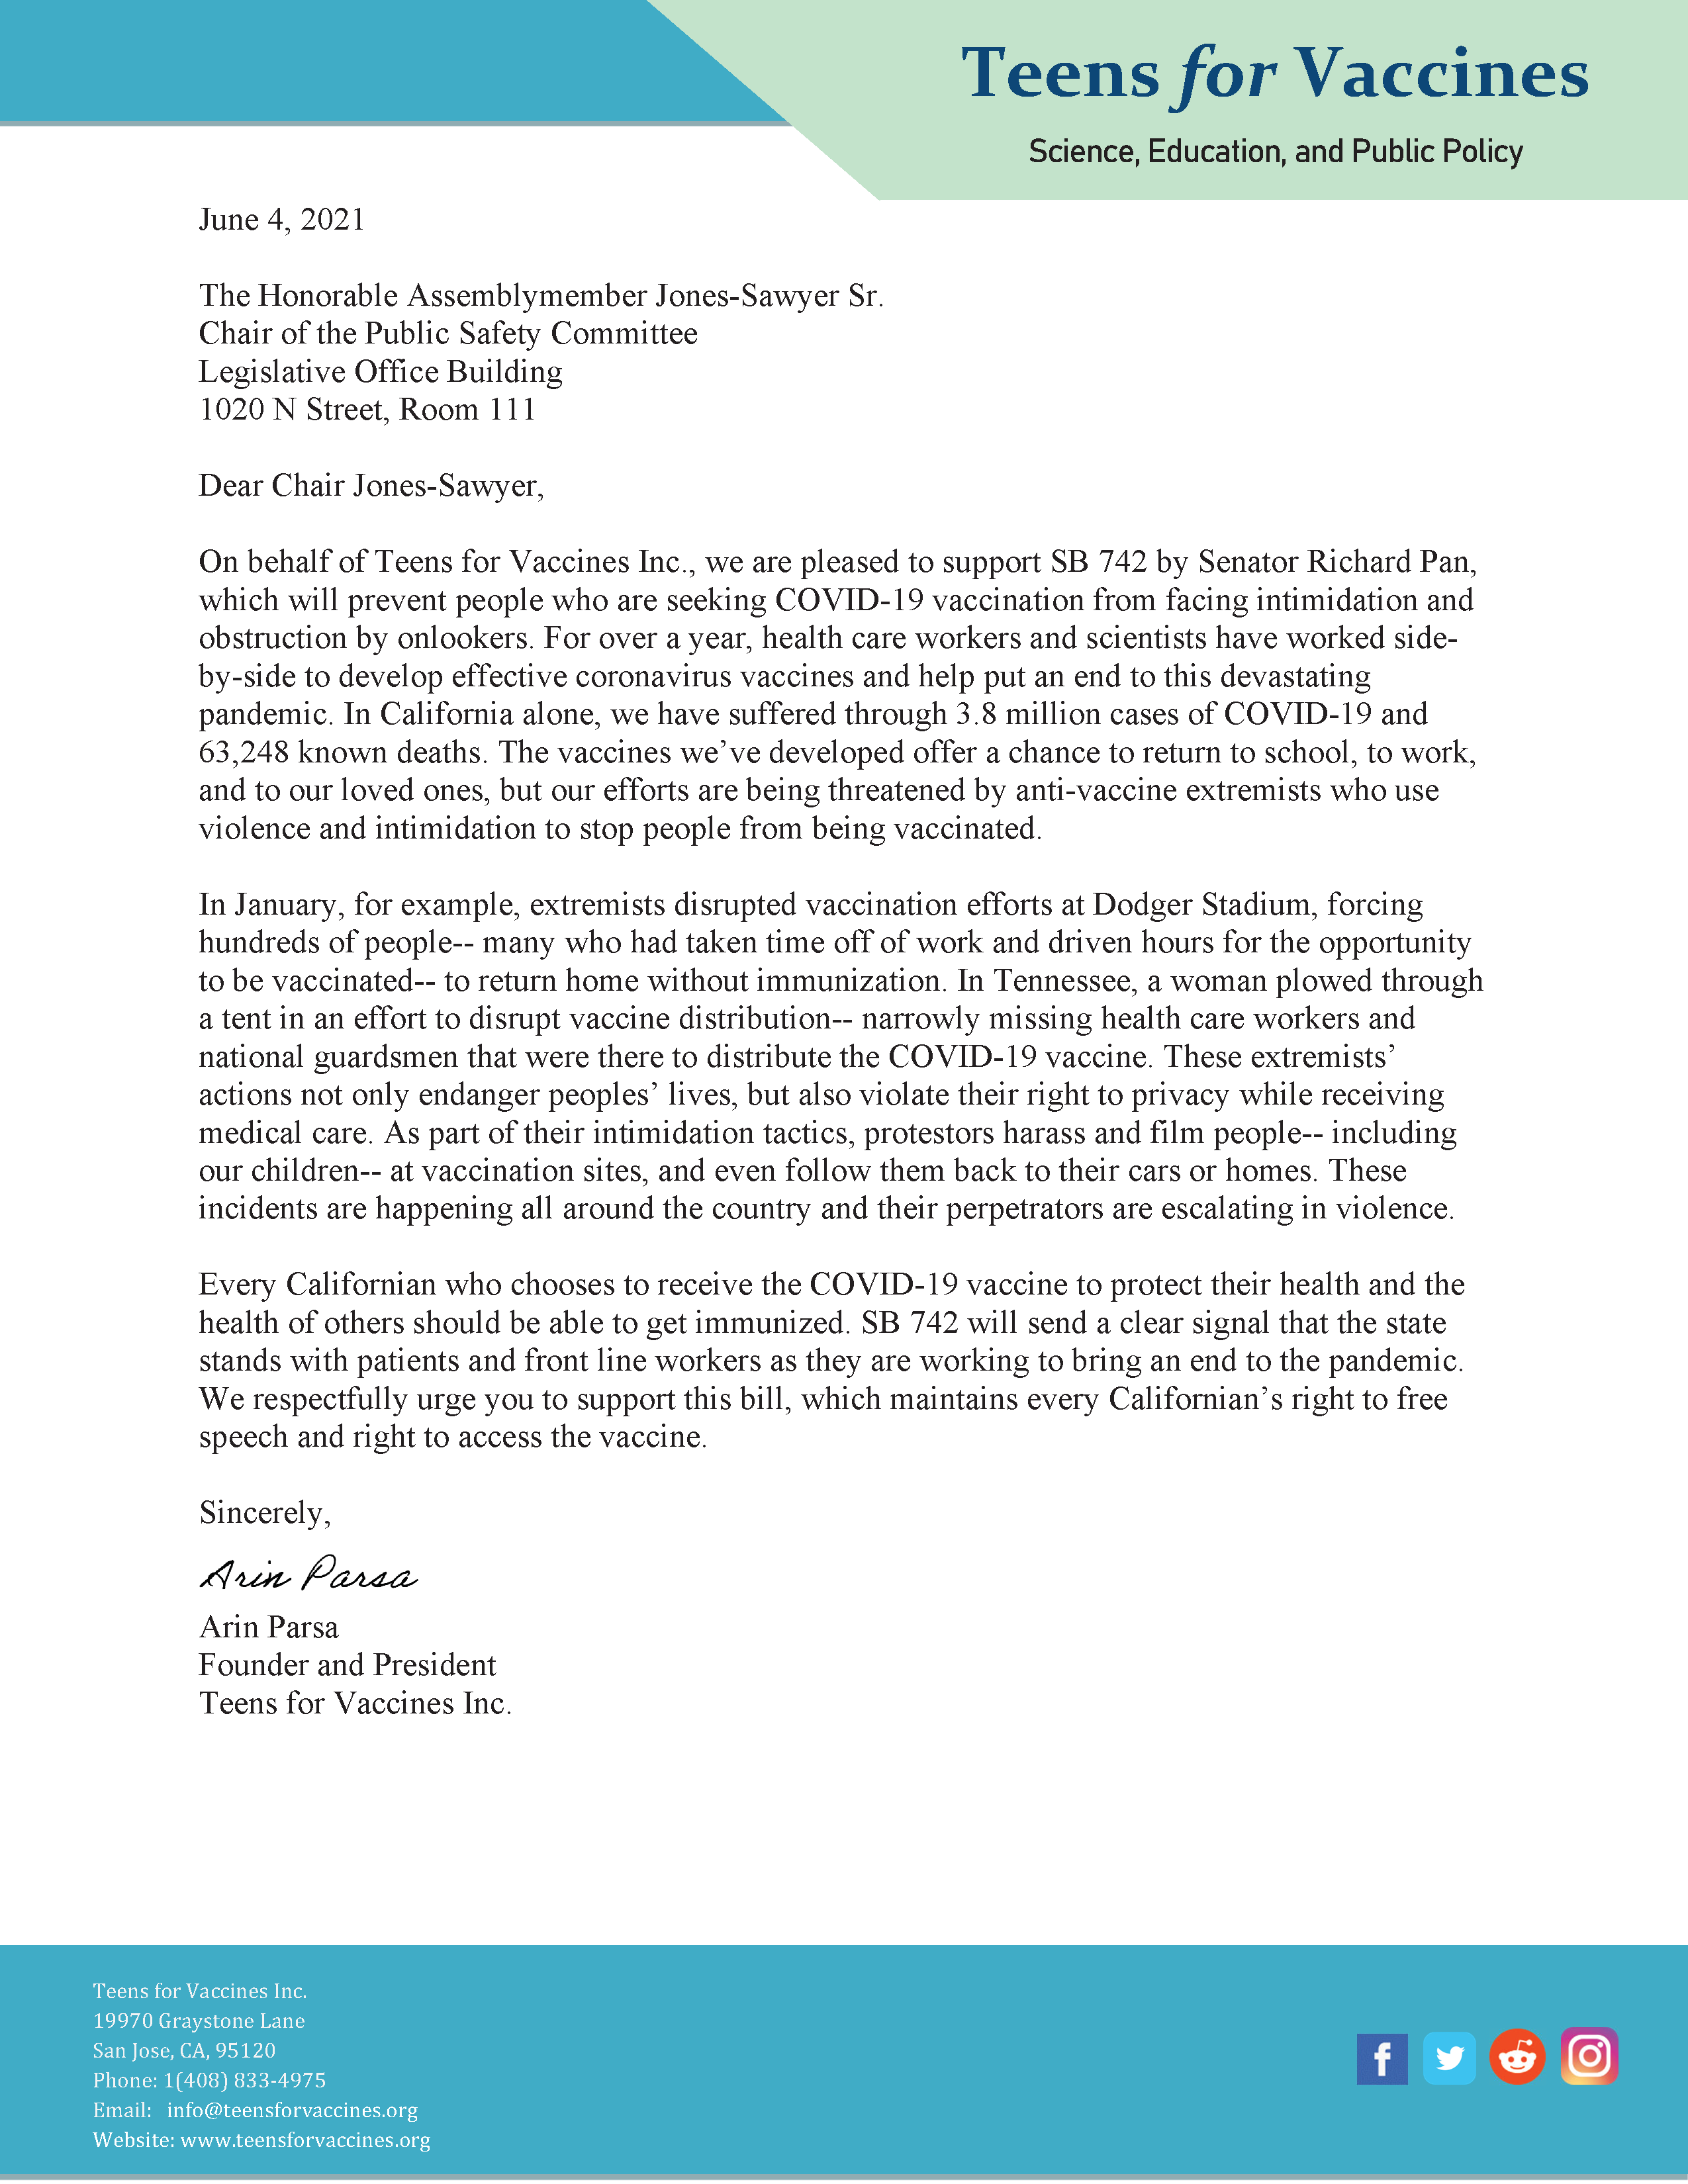 SB 742 Support Letter- Teens for Vaccines